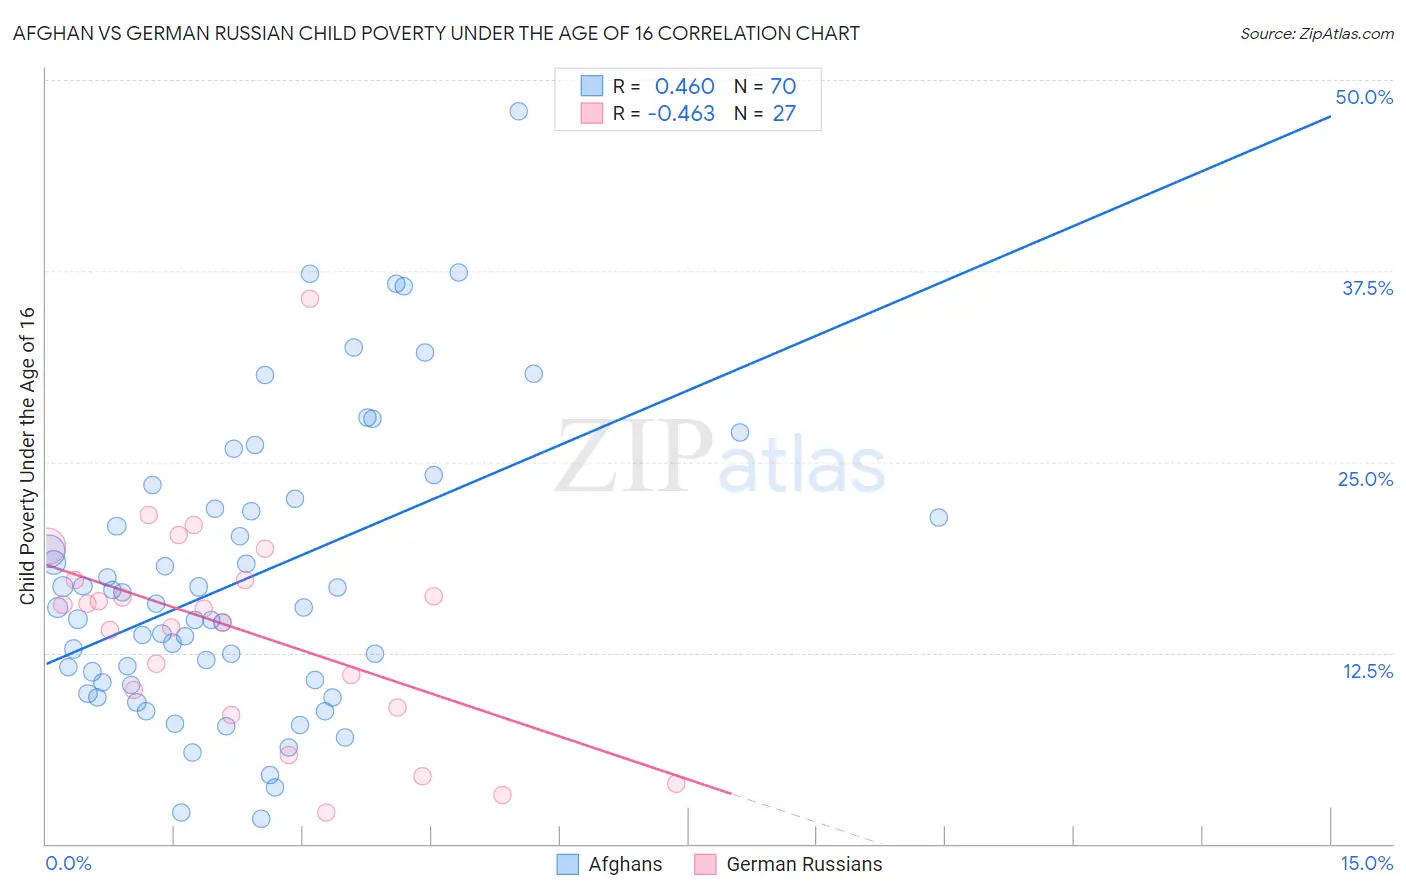 Afghan vs German Russian Child Poverty Under the Age of 16